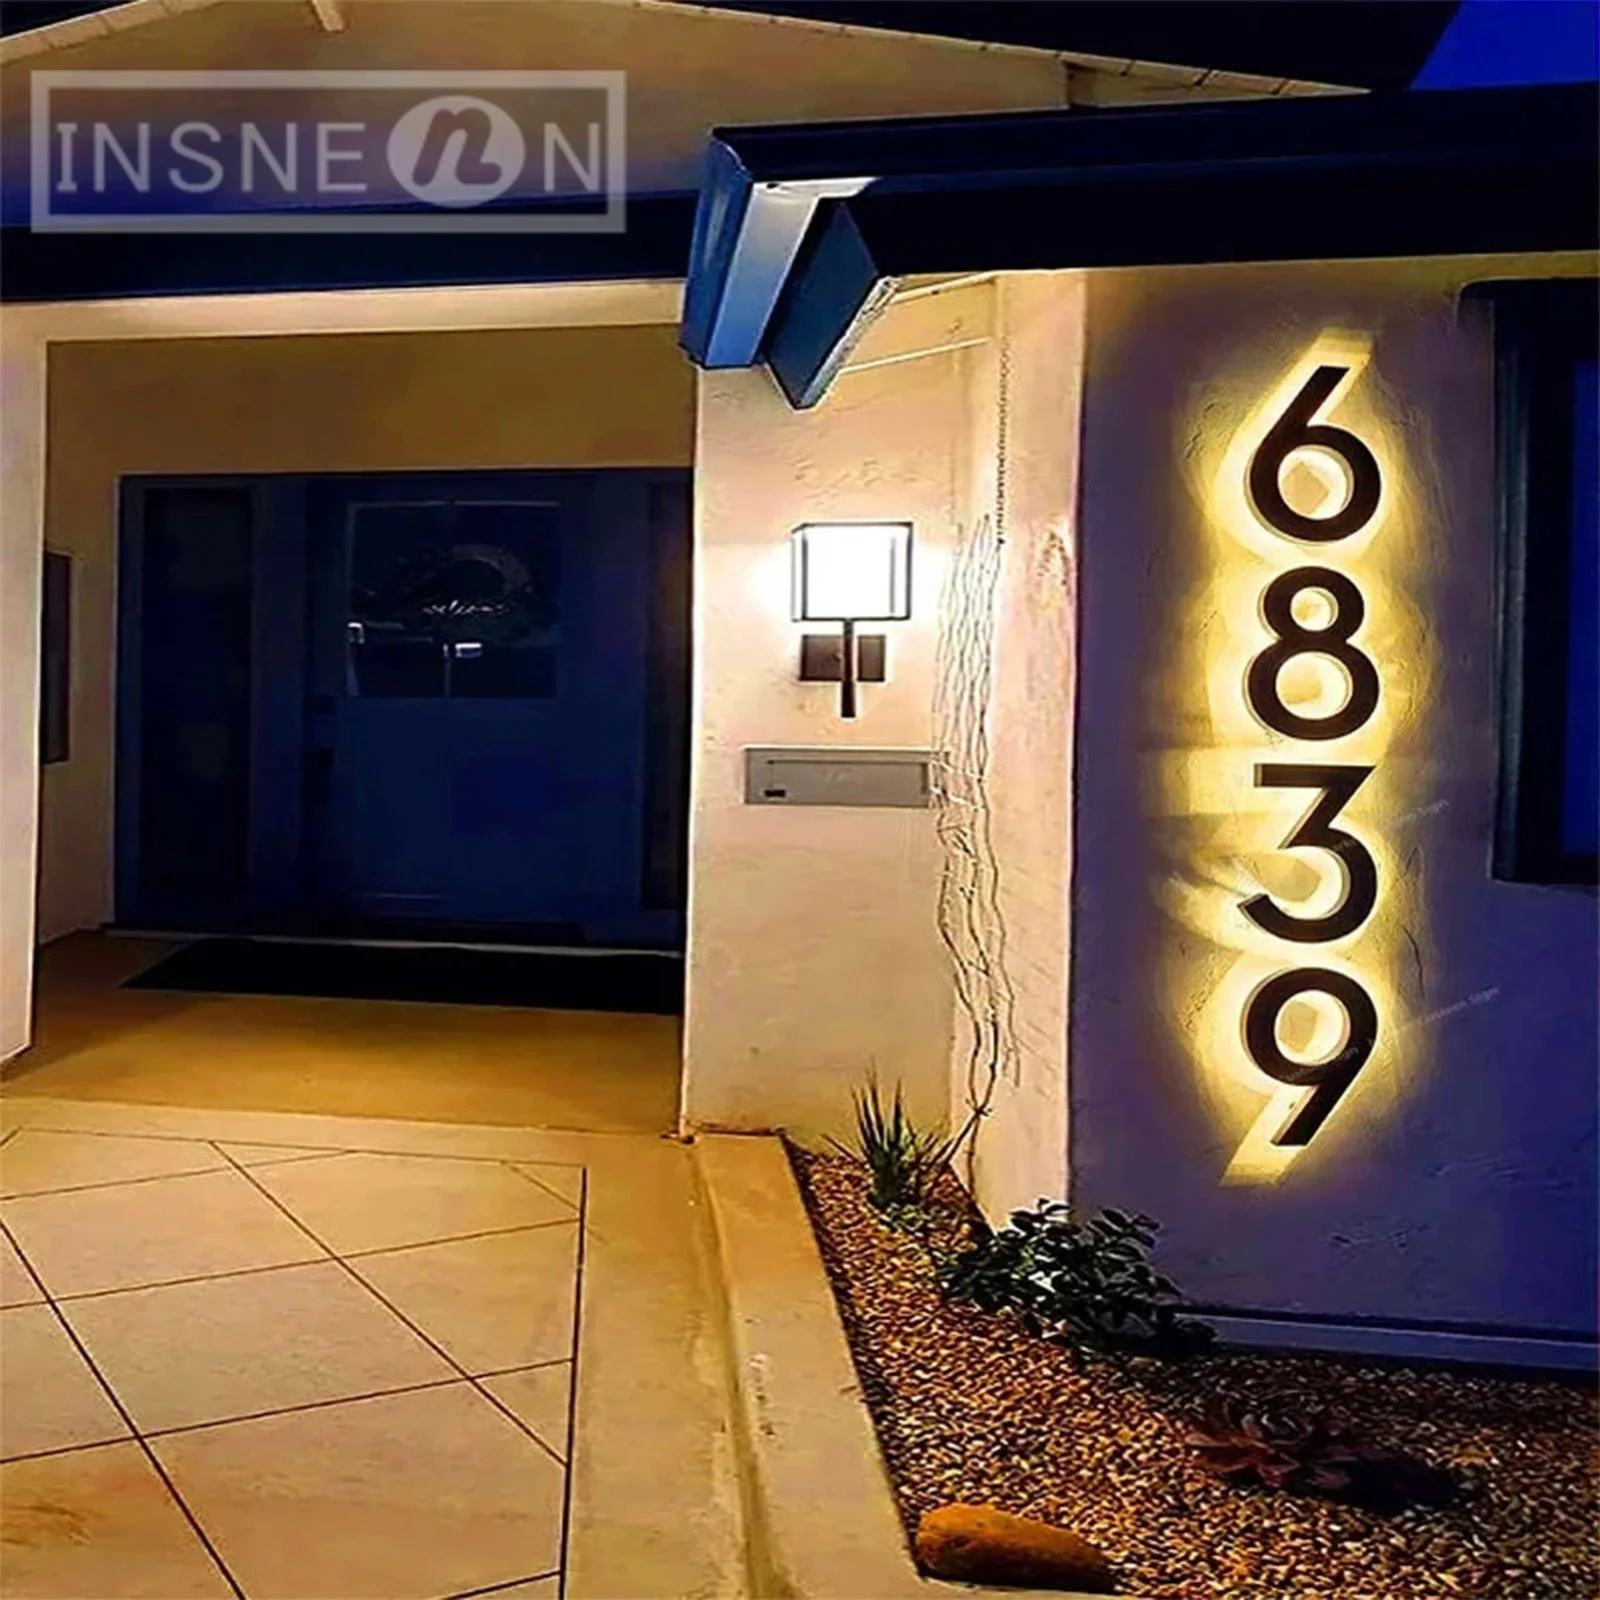 3d-number-plate-backlit-letter-number-sign-for-house-stainless-steel-led-signage-waterproof-outdoor-exterior-address-plate